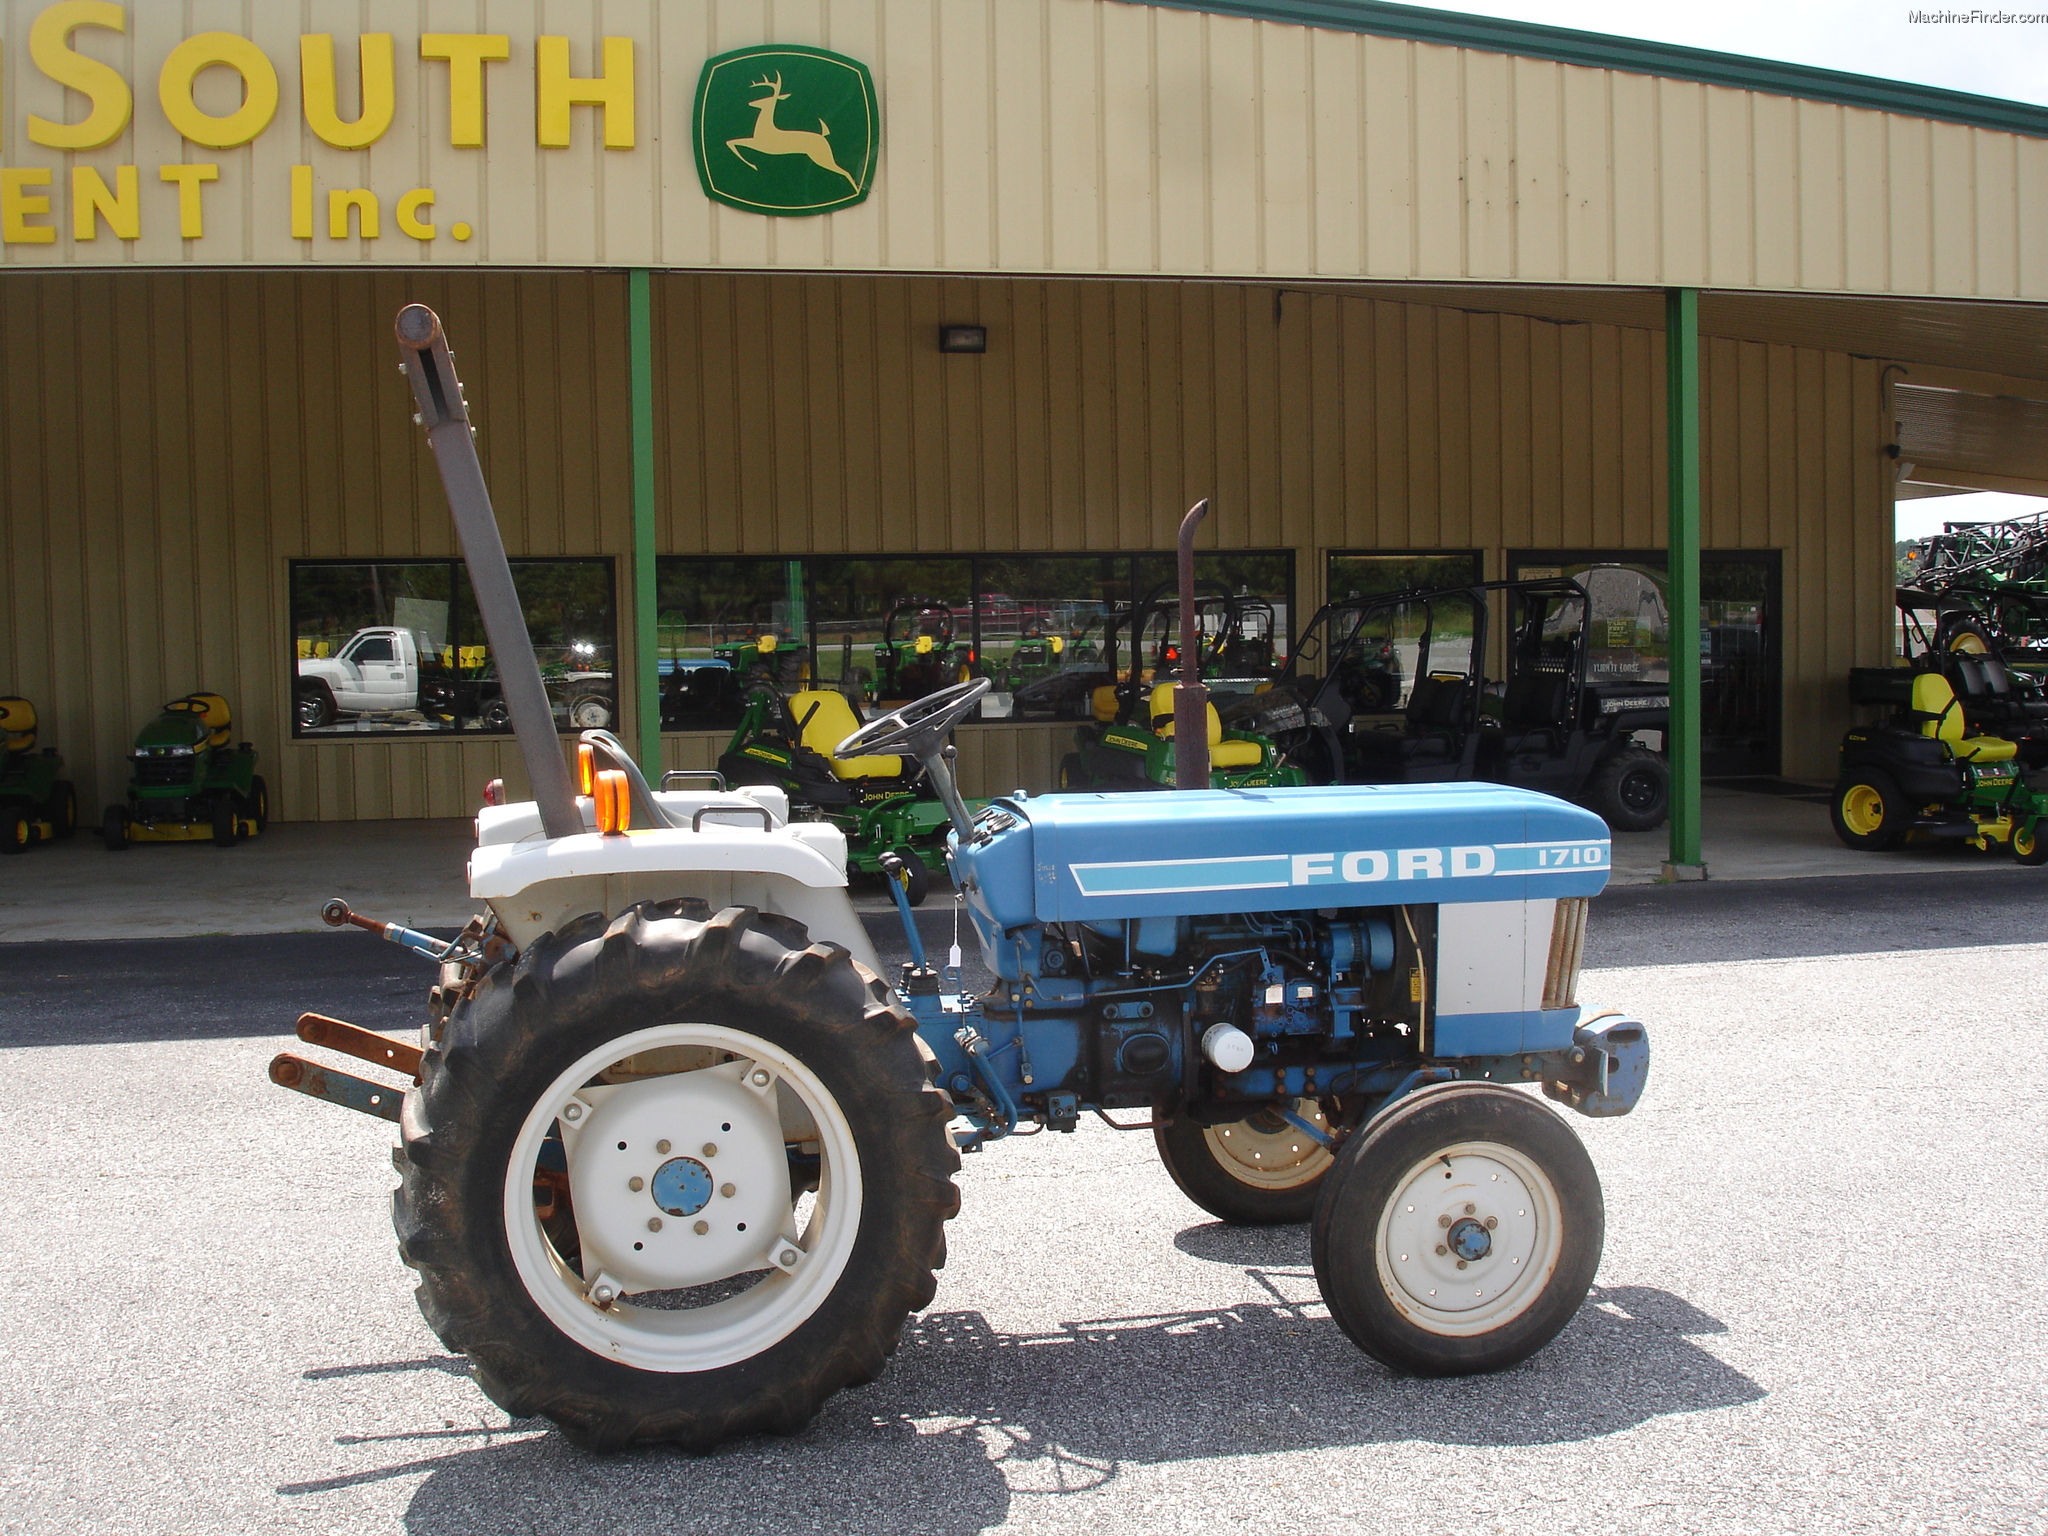 1987 Ford FORD 1710 2WD TRACTOR Tractors - Compact (1-40hp.) - John ...